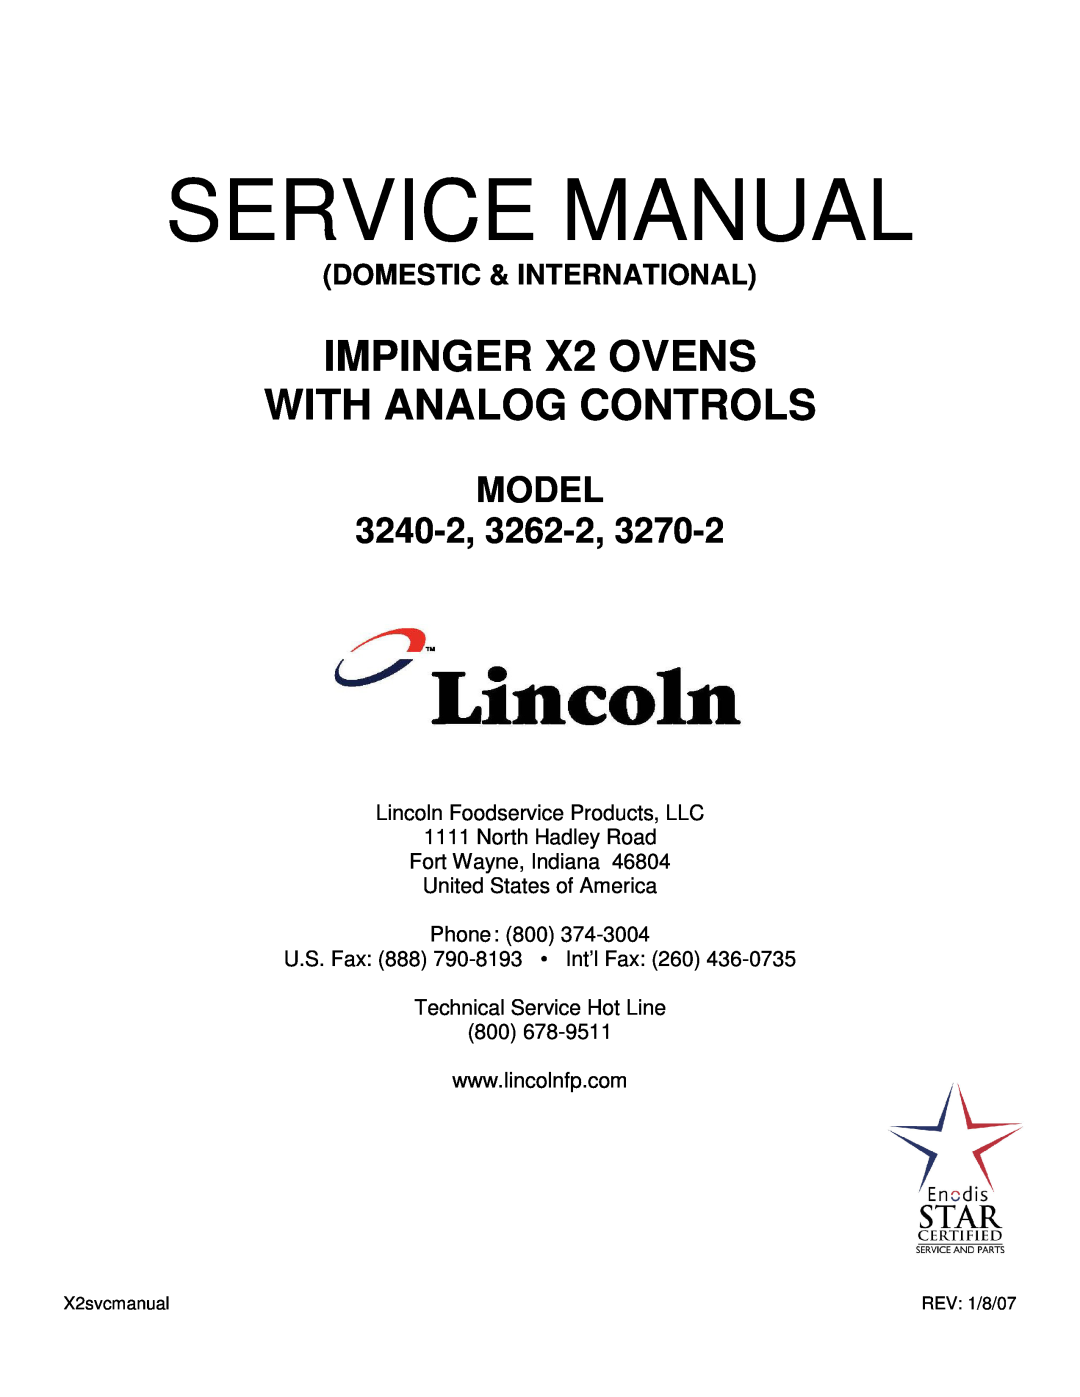 Lincoln 3270-2 service manual Lincoln Foodservice Products, LLC, North Hadley Road Fort Wayne, Indiana, X2svcmanual, Model 